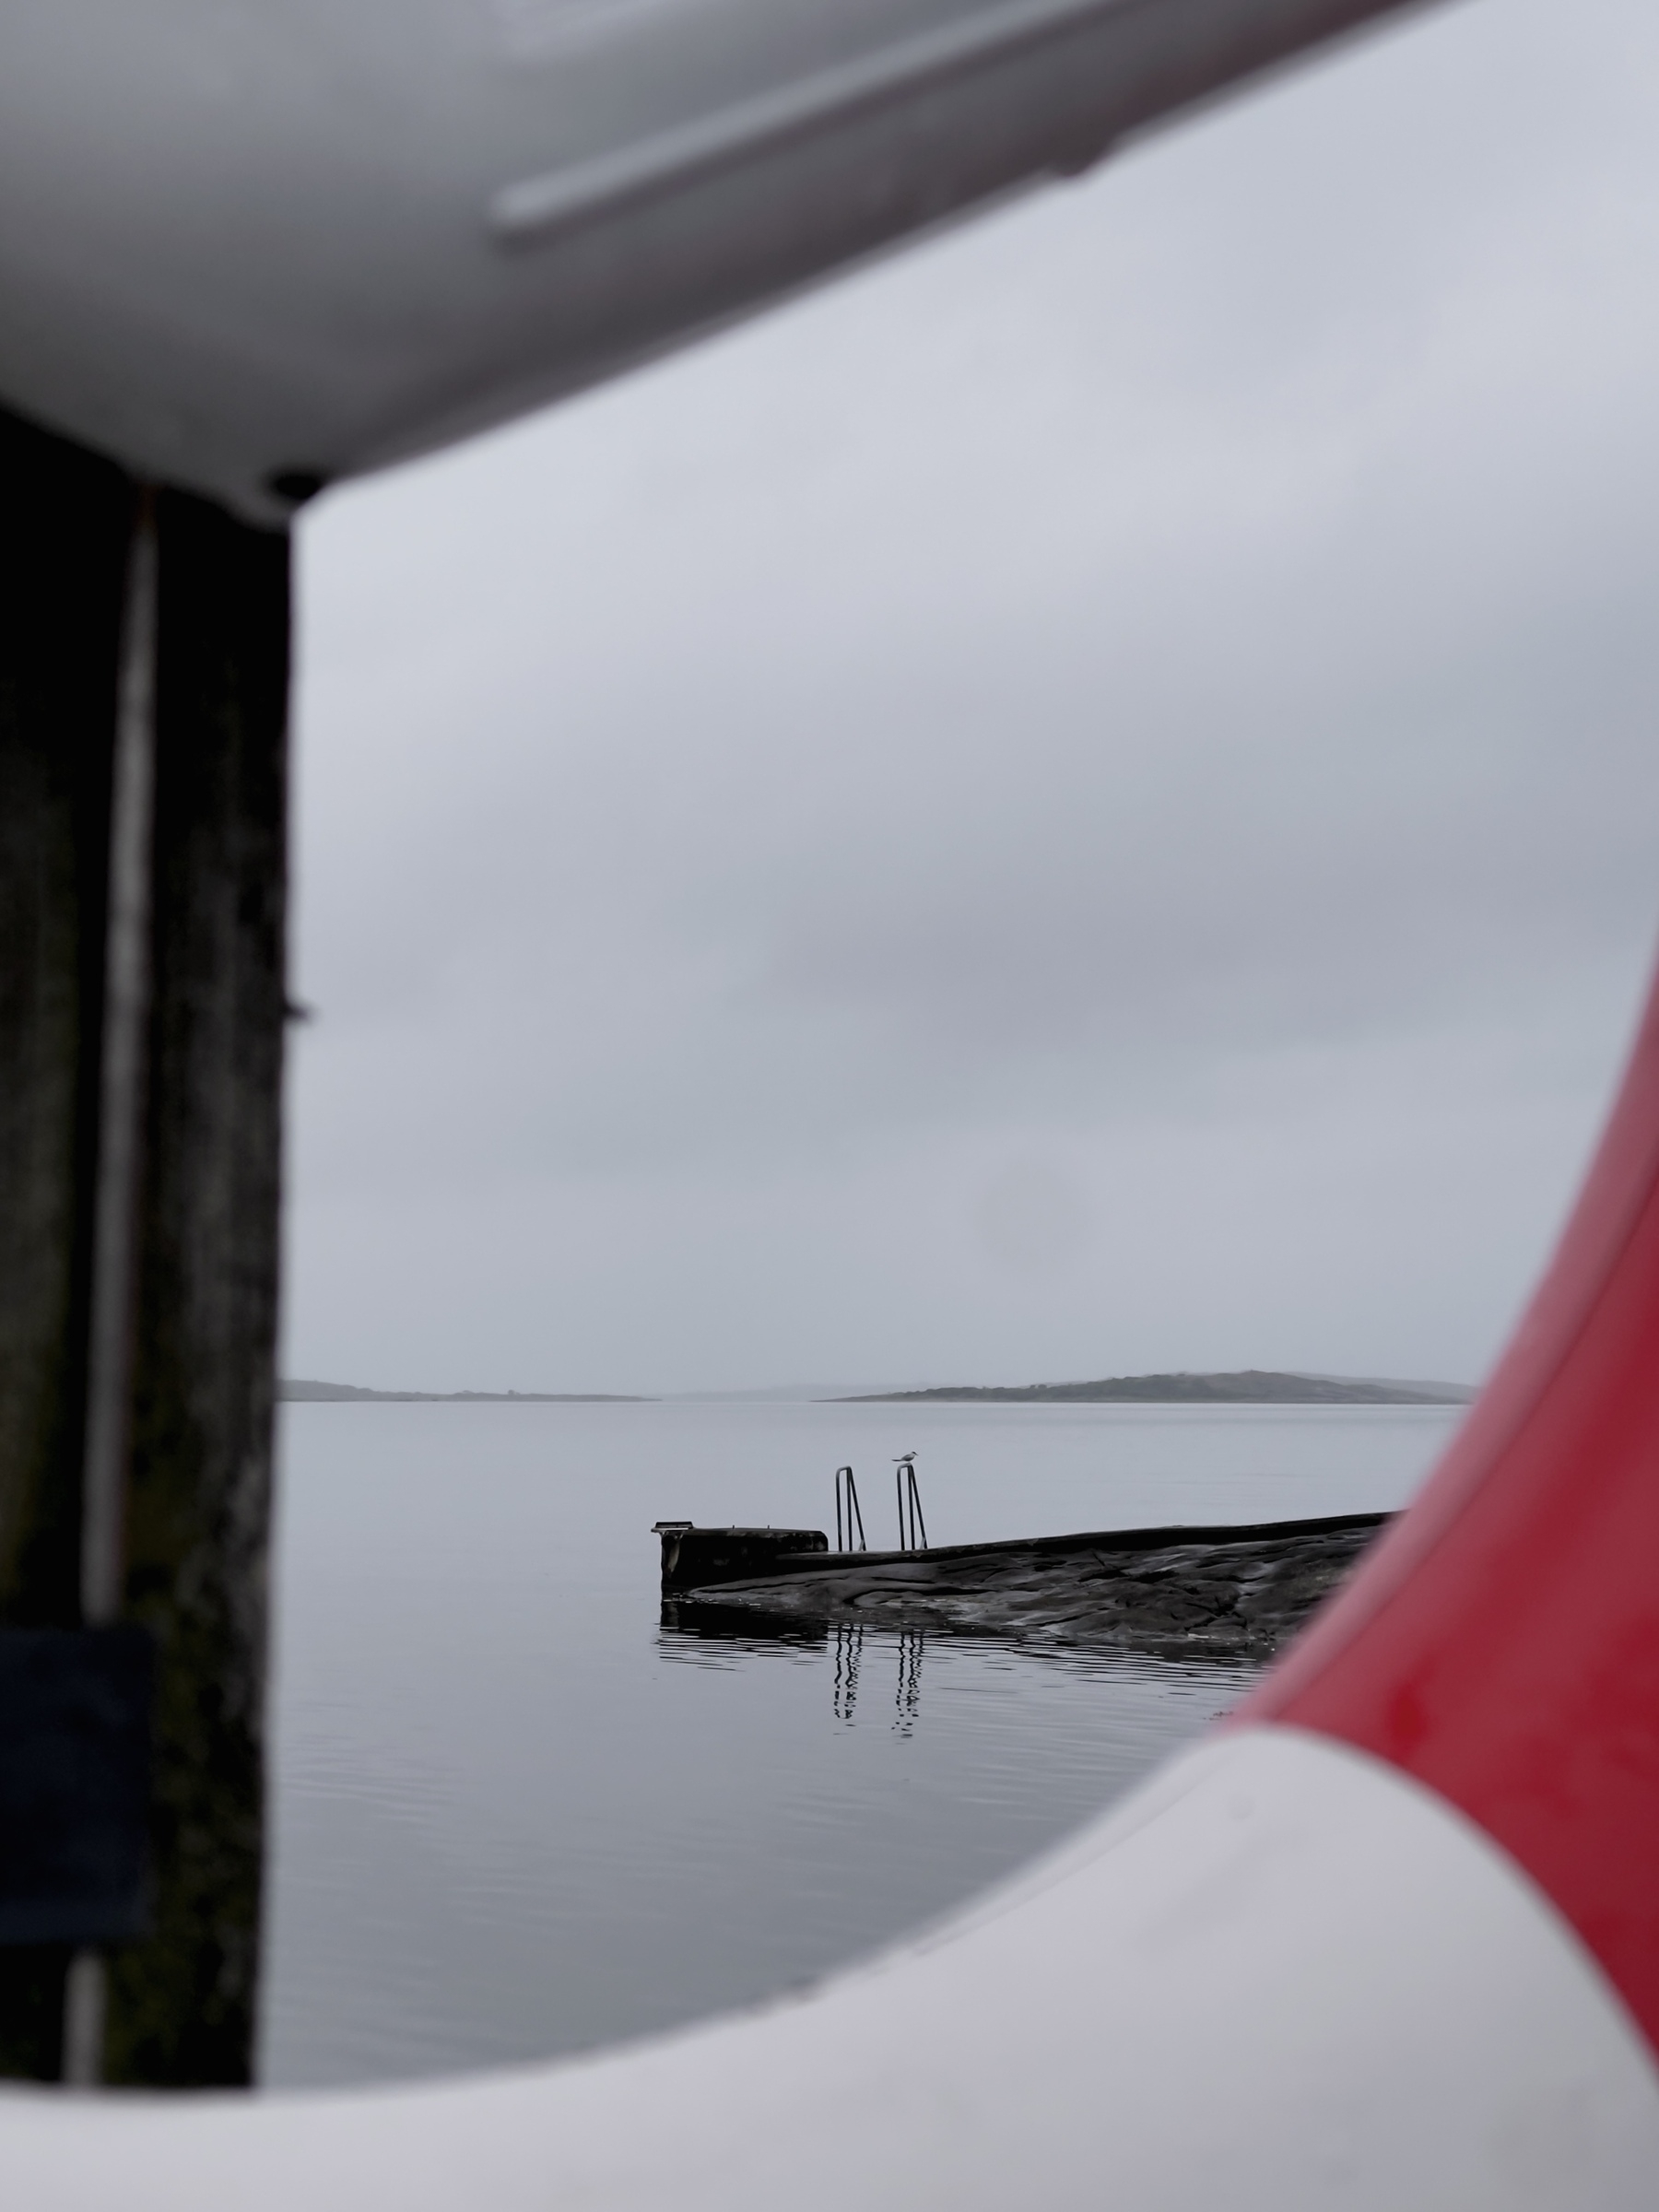 A serene view of a calm body of water with a dock featuring a ladder, framed by a lifebuoy.